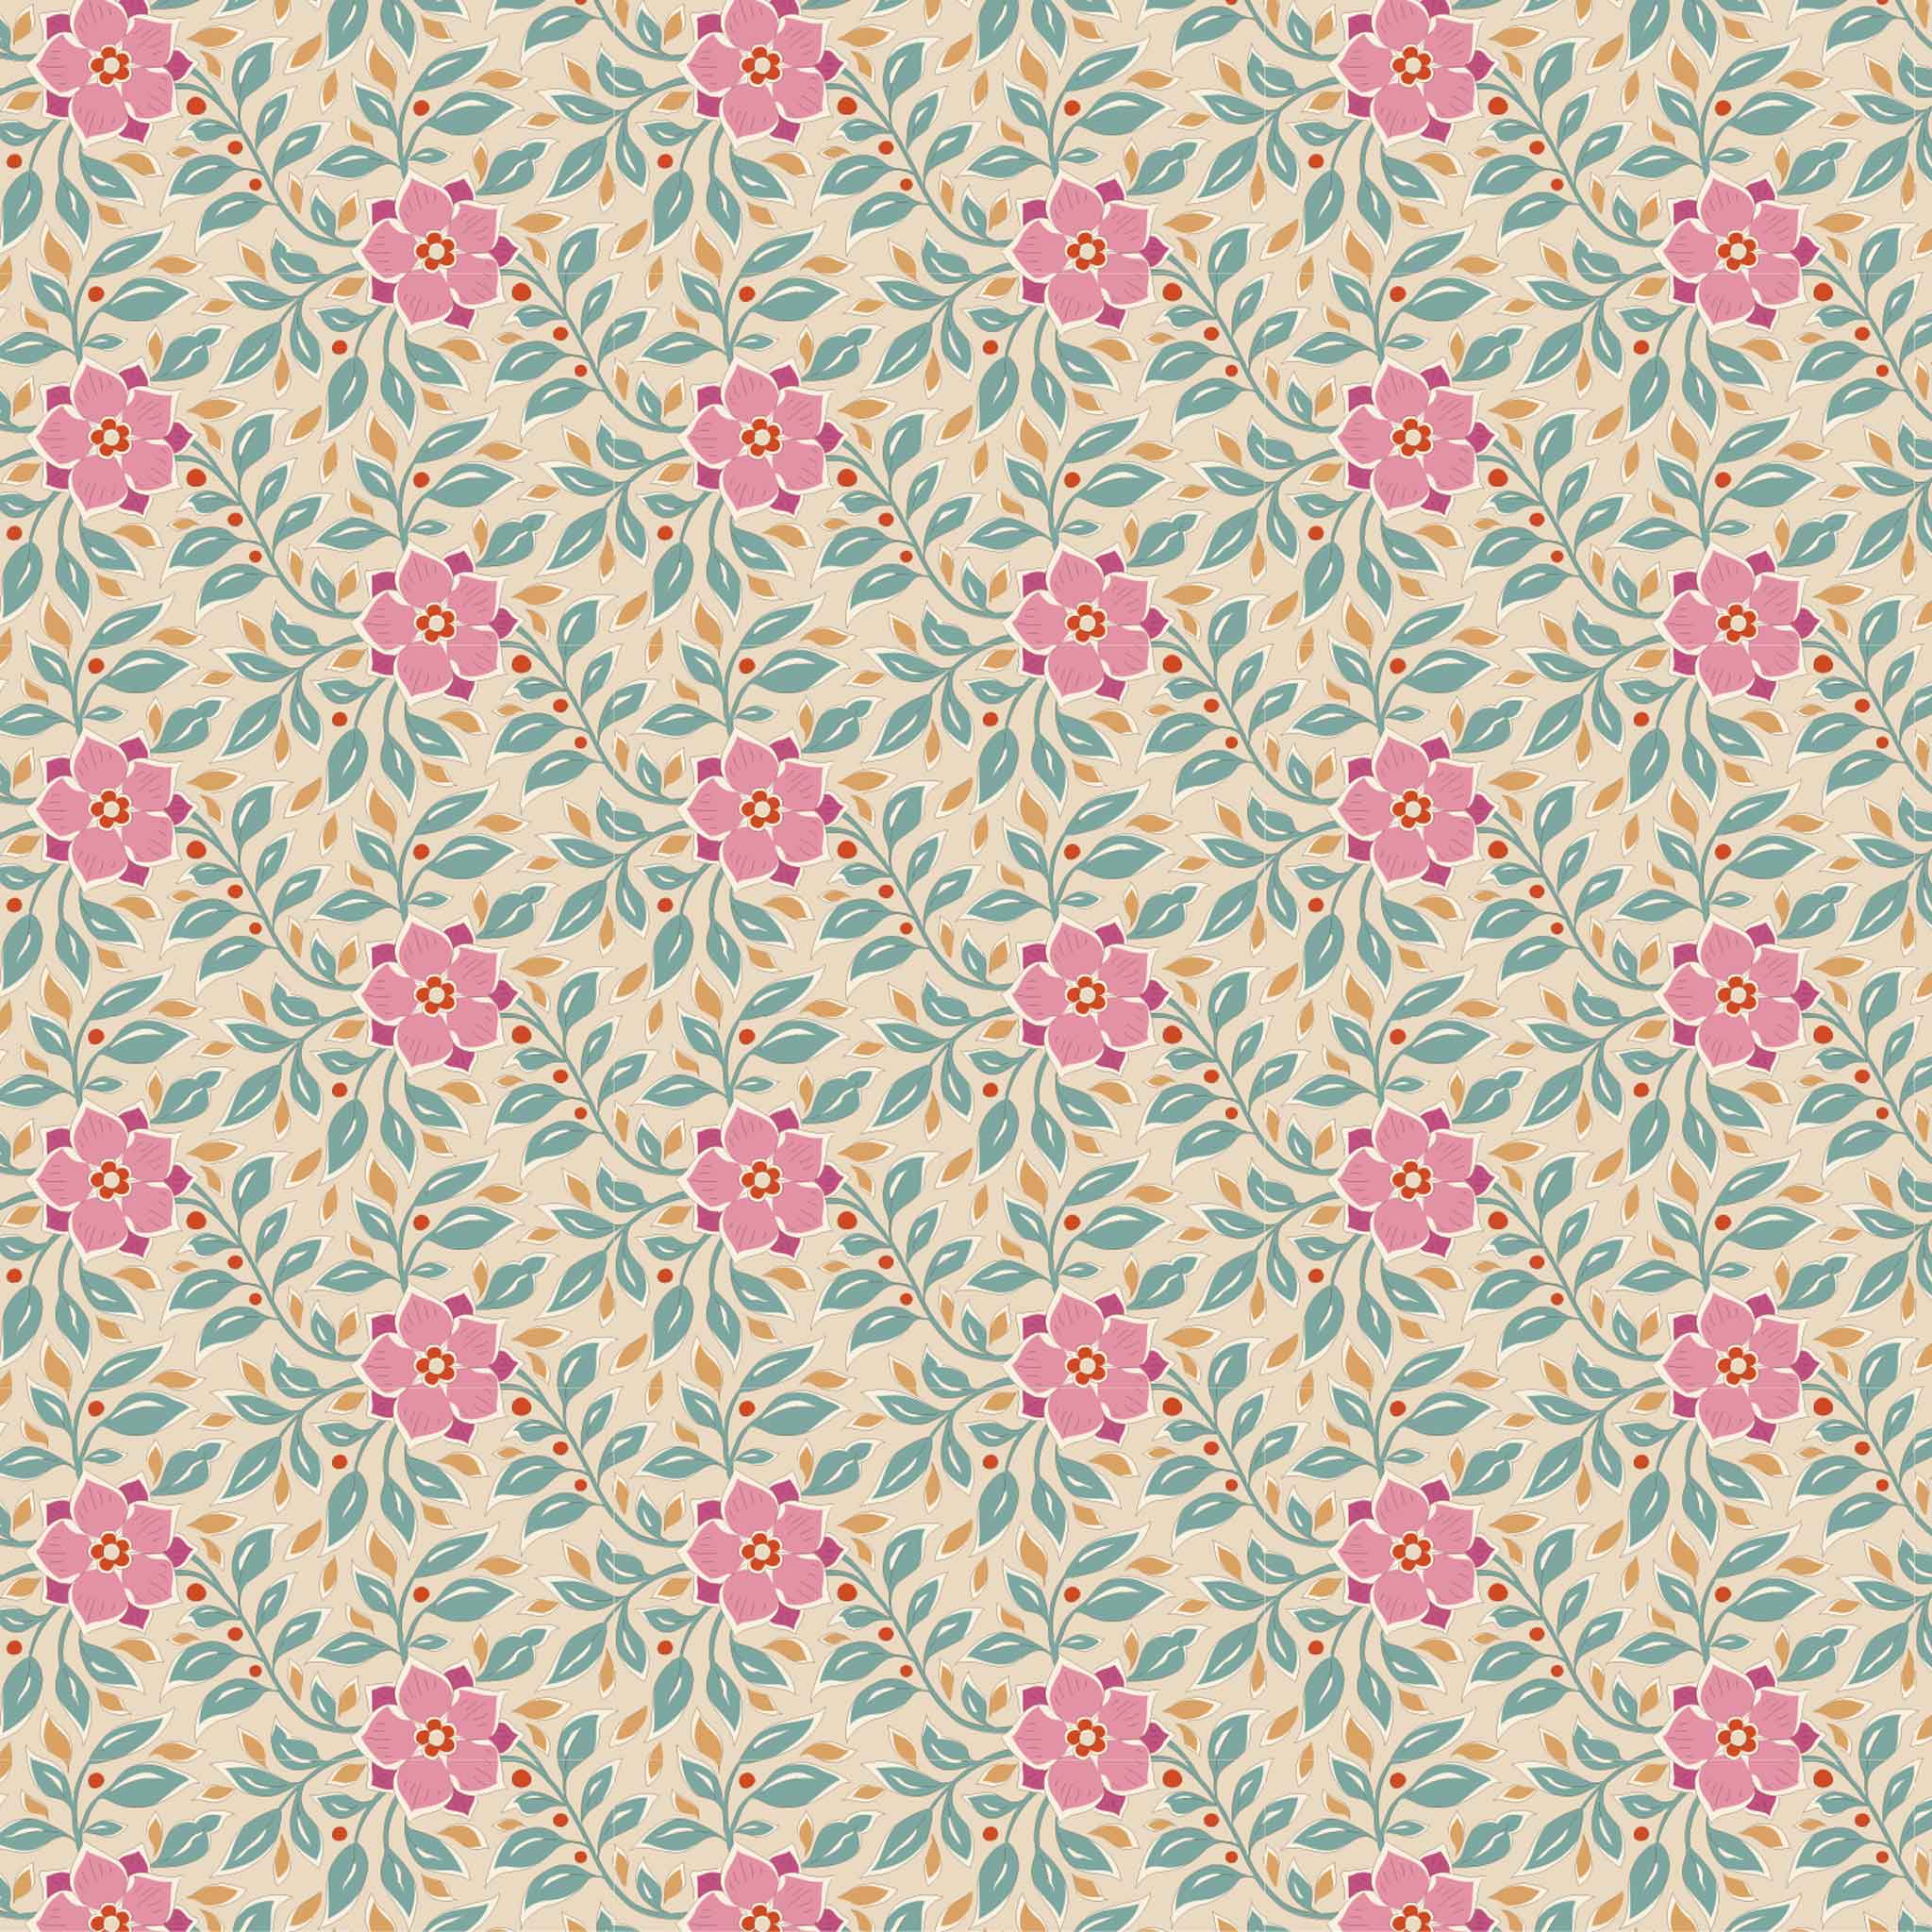 Tilda Wendy Teal Cotton Fabric Windy Days Collection - TD100358